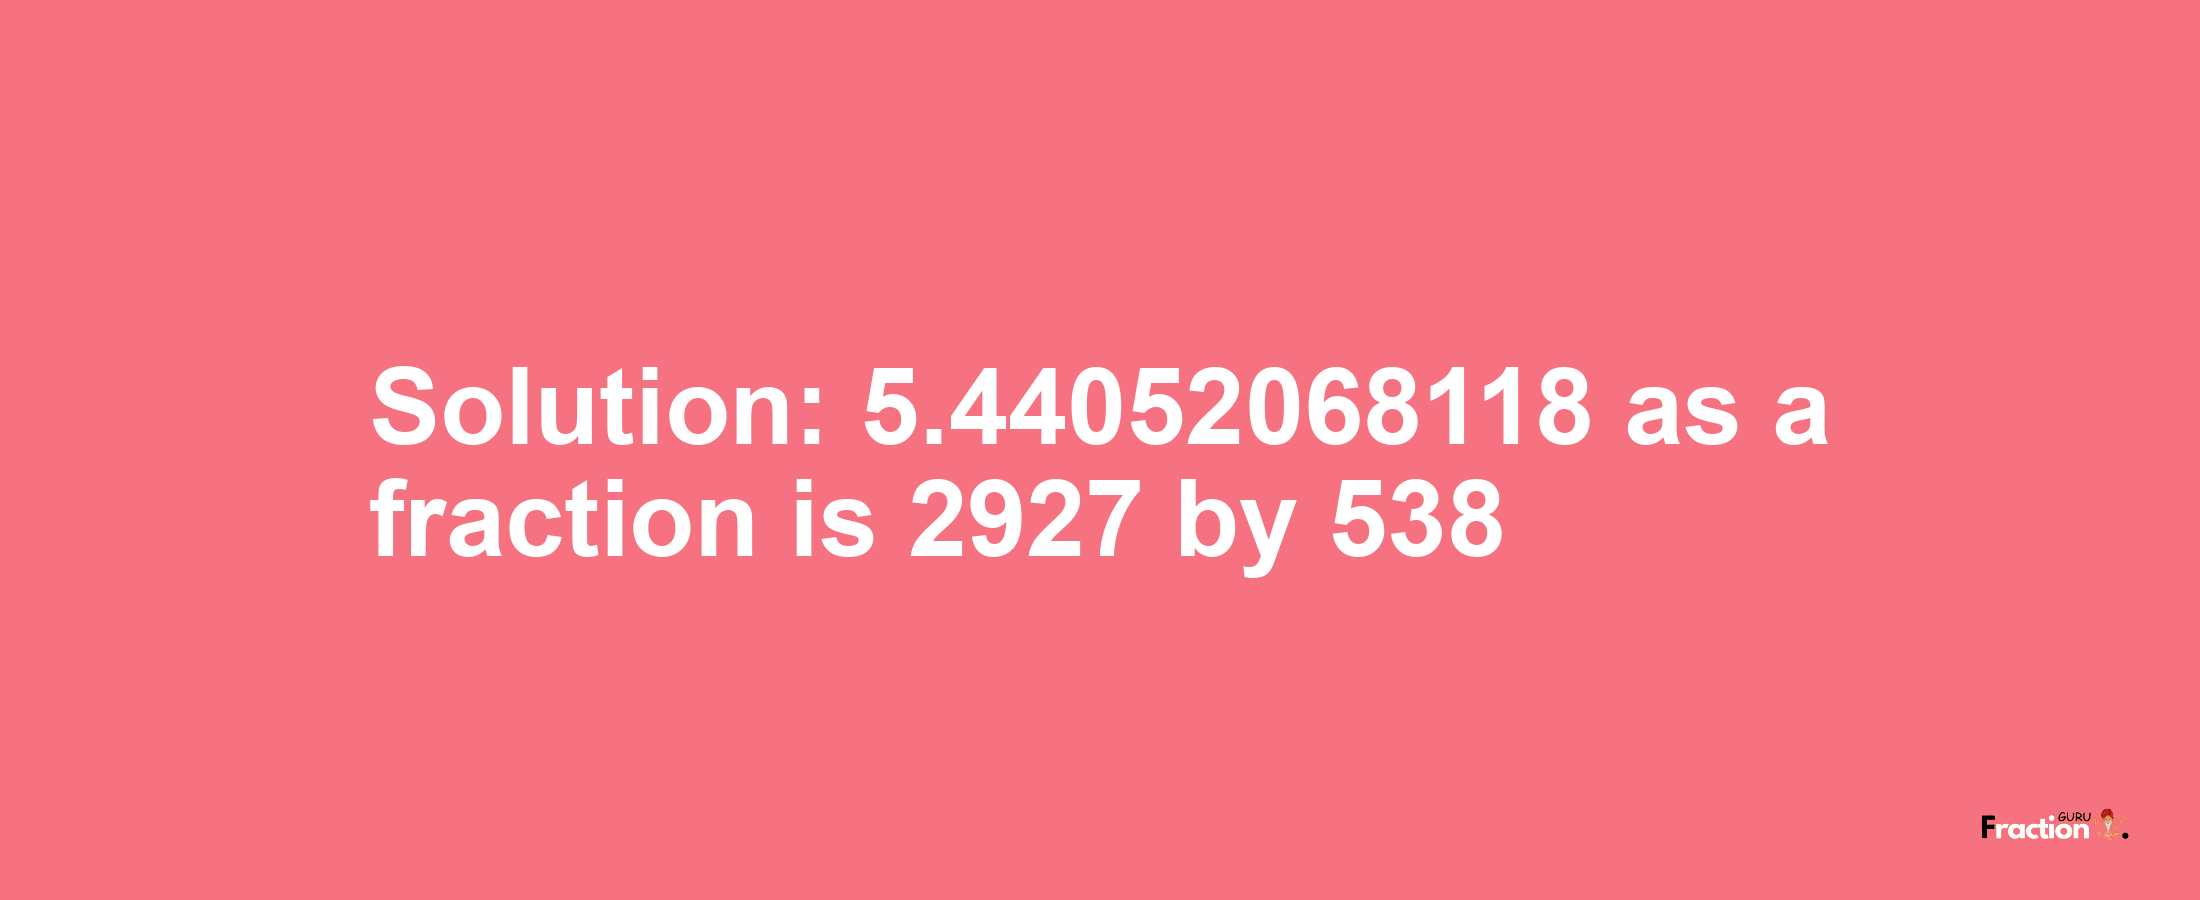 Solution:5.44052068118 as a fraction is 2927/538